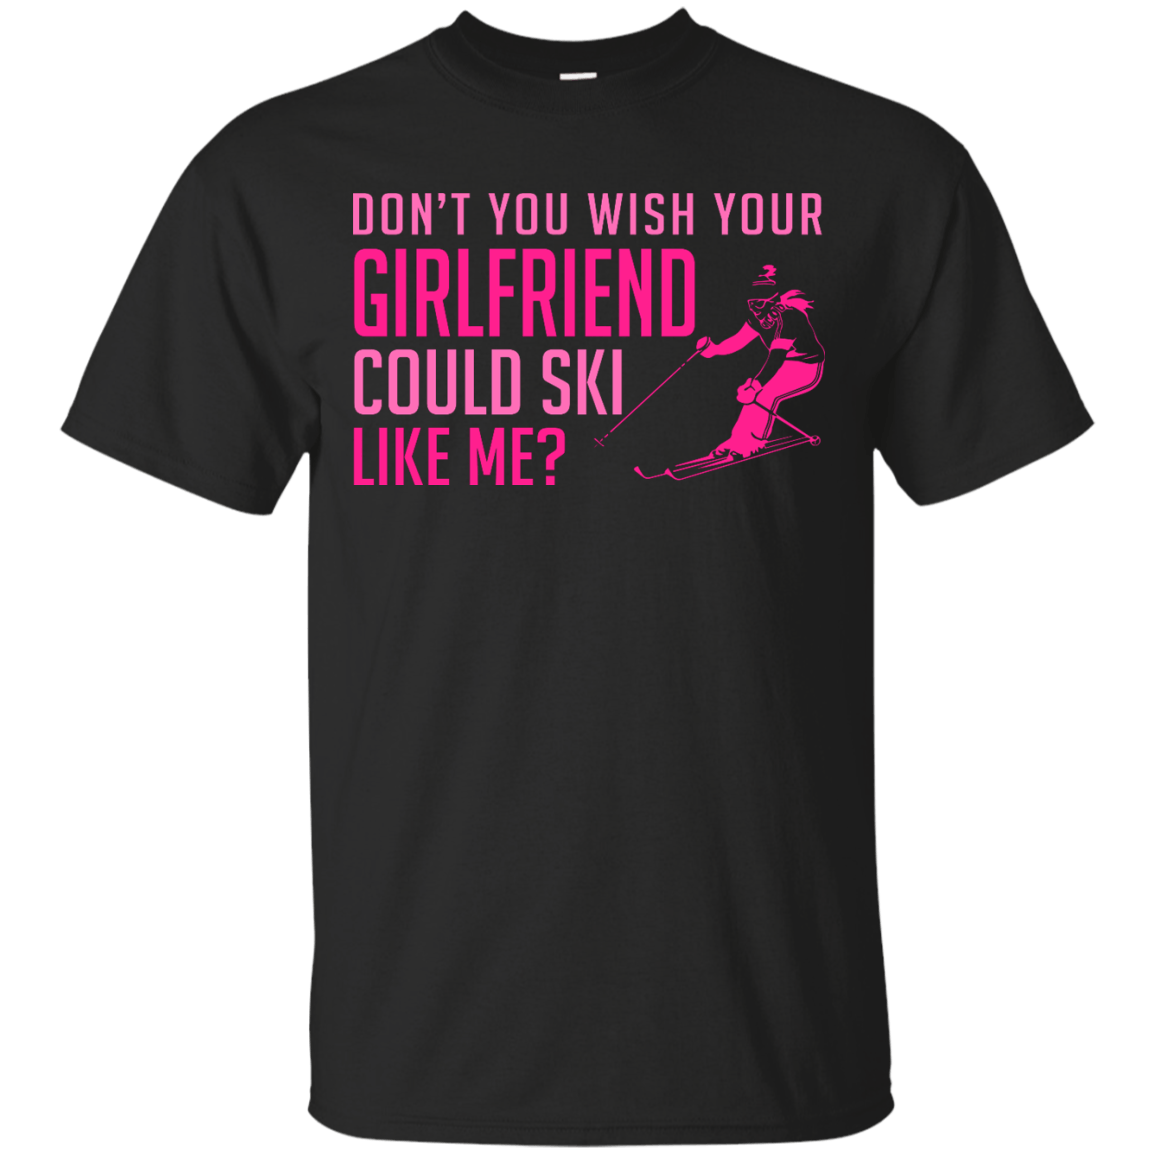 Don't You Wish Your Girlfriend Could Ski Like Me? Tees